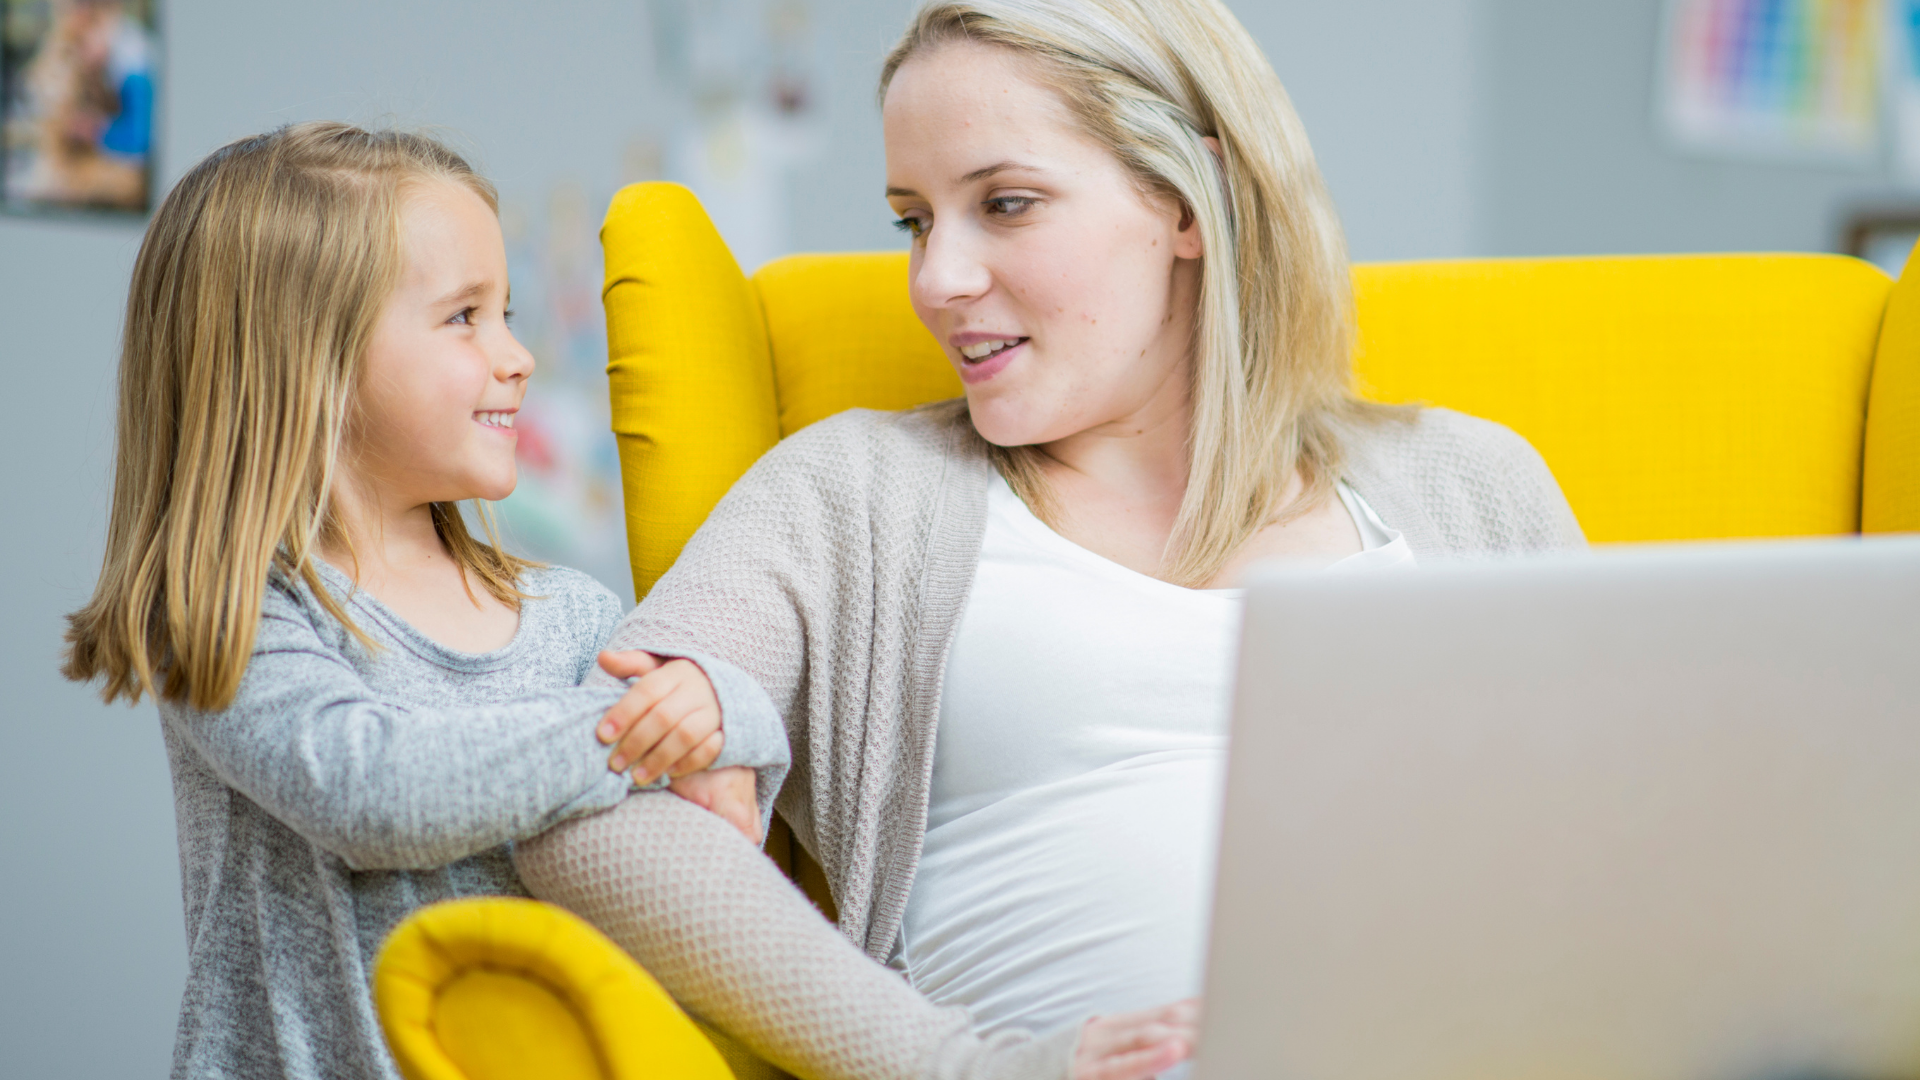 How to cut down work from home distractions as a mom